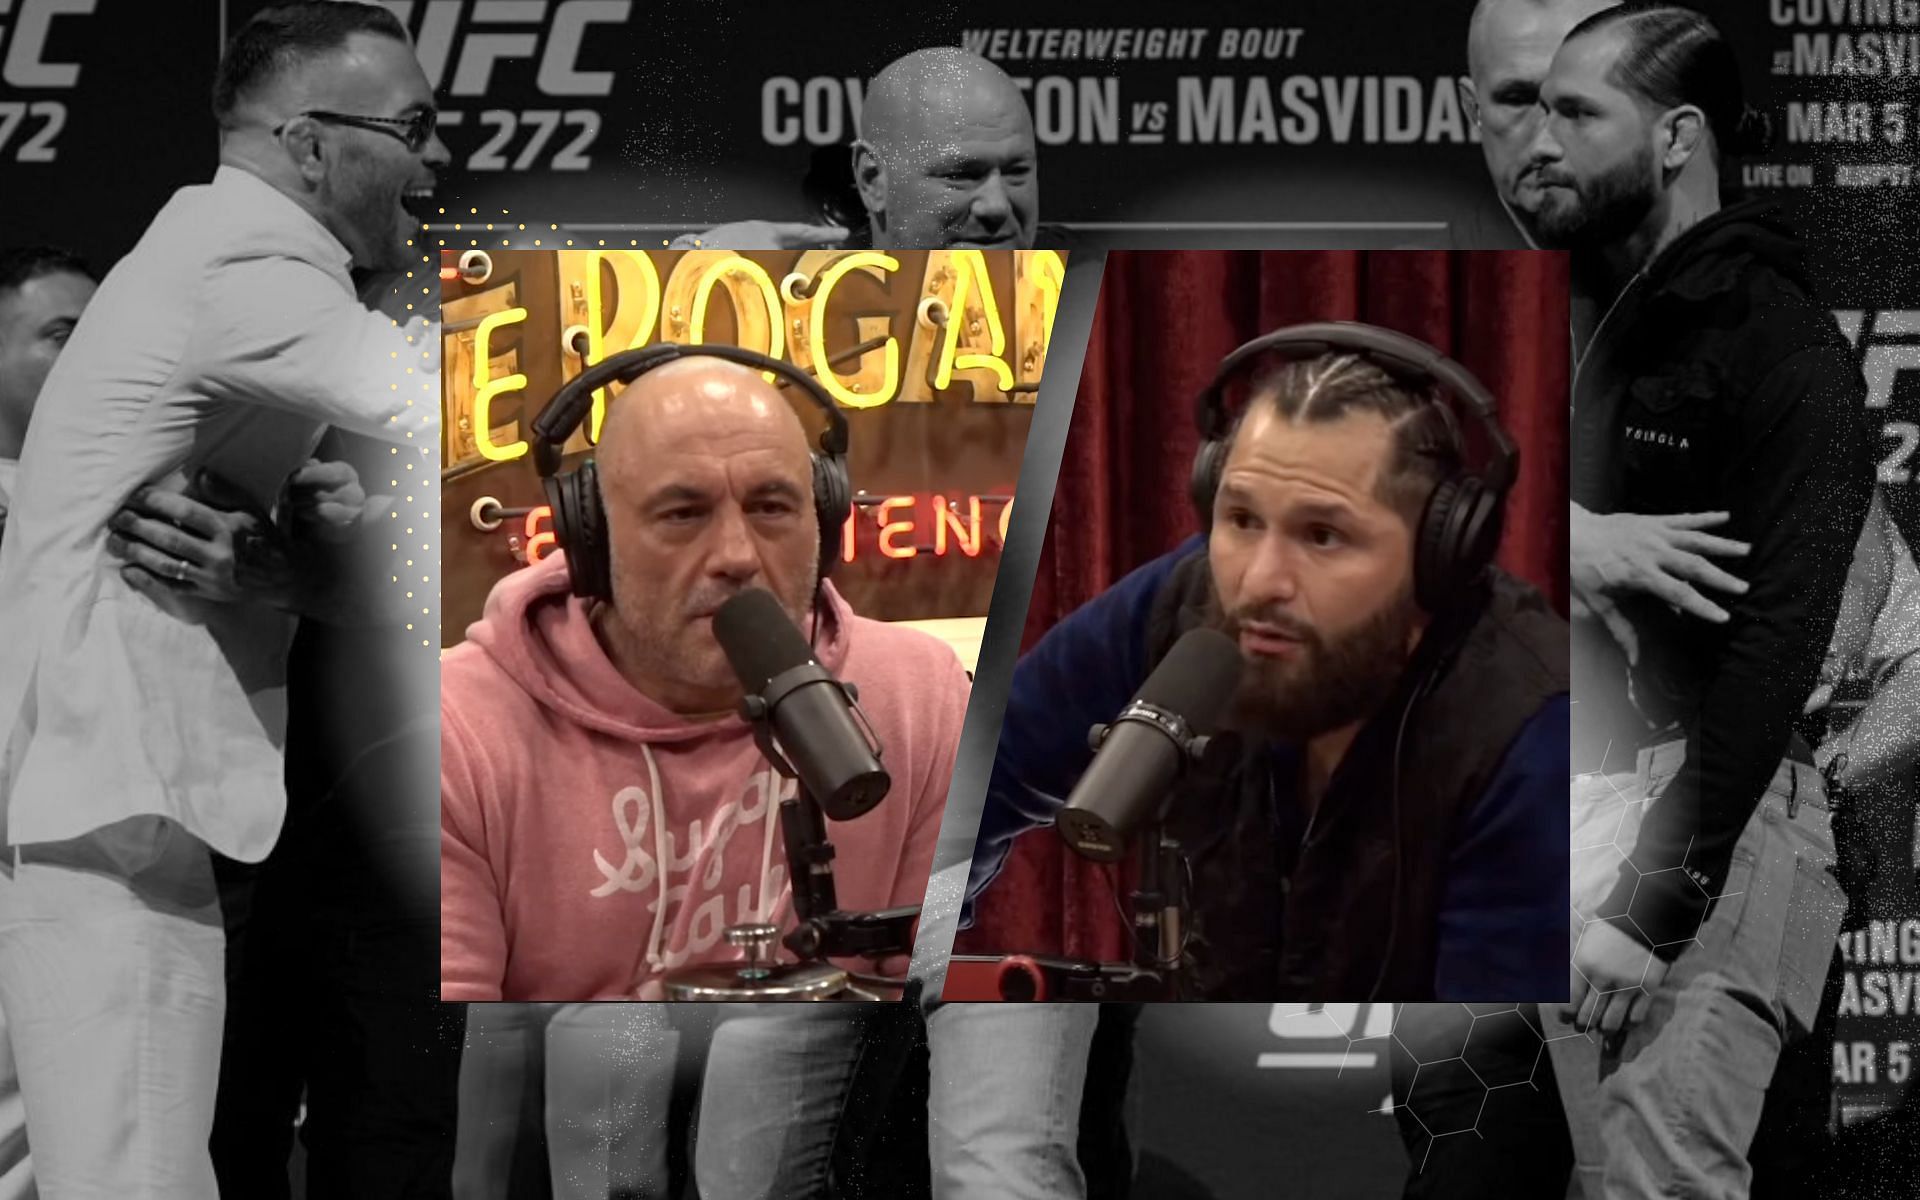 Jorge Masvidal vows to &lsquo;legally murd*r